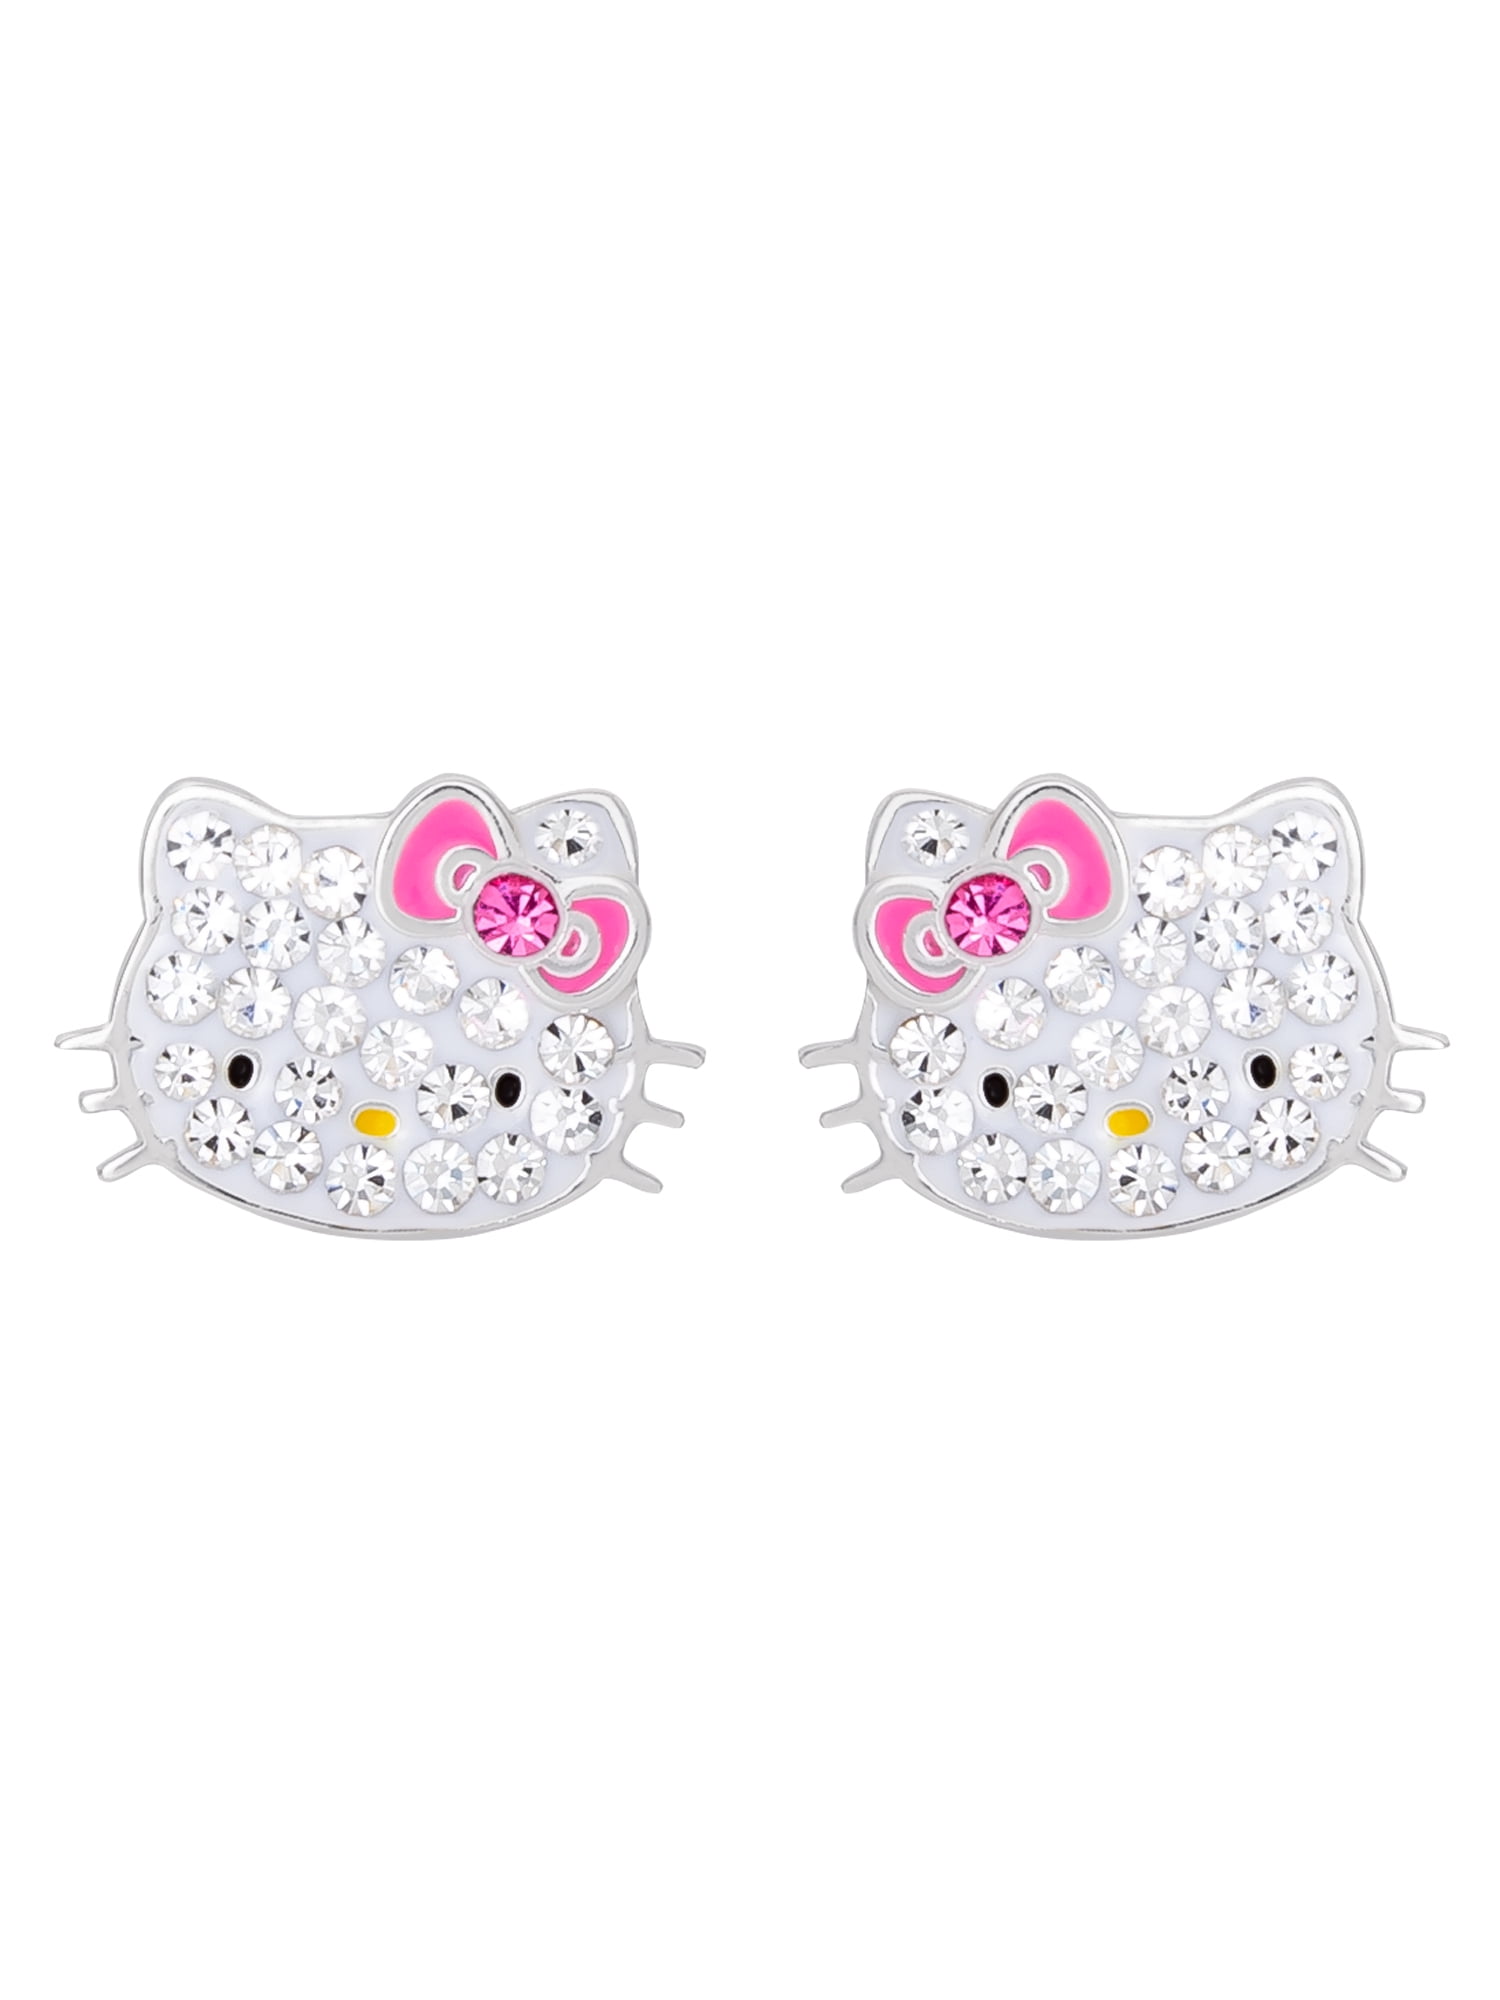 USA! Hello Kitty Sterling Silver Earrings~ Petitie Clear Austrian Crystals 